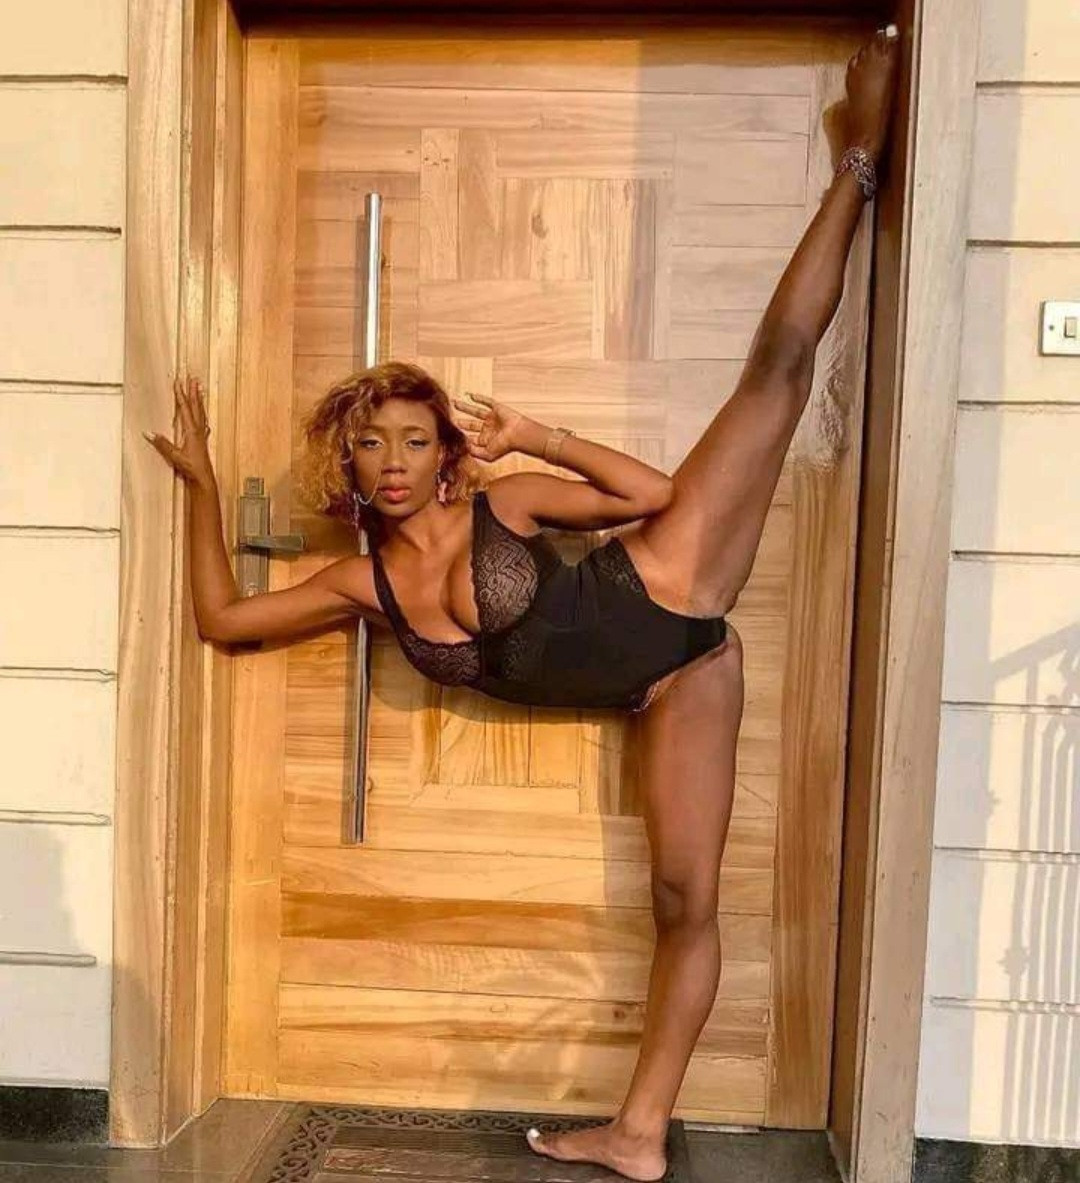 Korra Obidi trends as she attempts to break the internet with racy photo